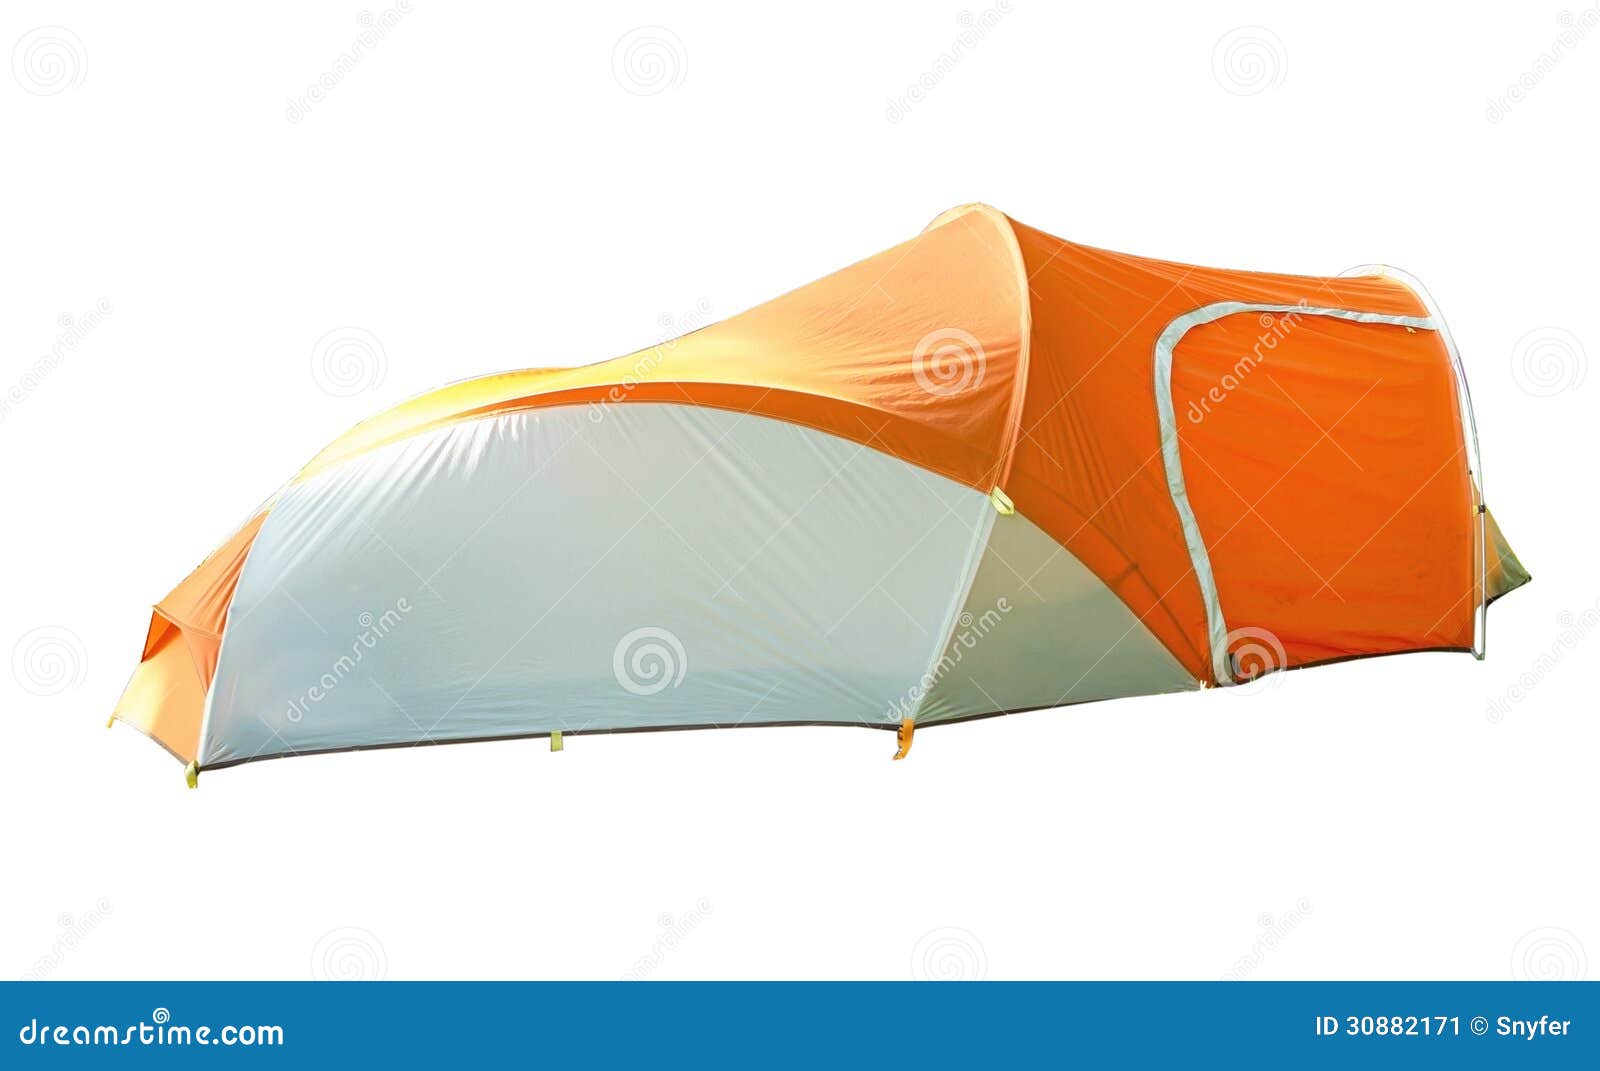 backpacking tent  on white background.